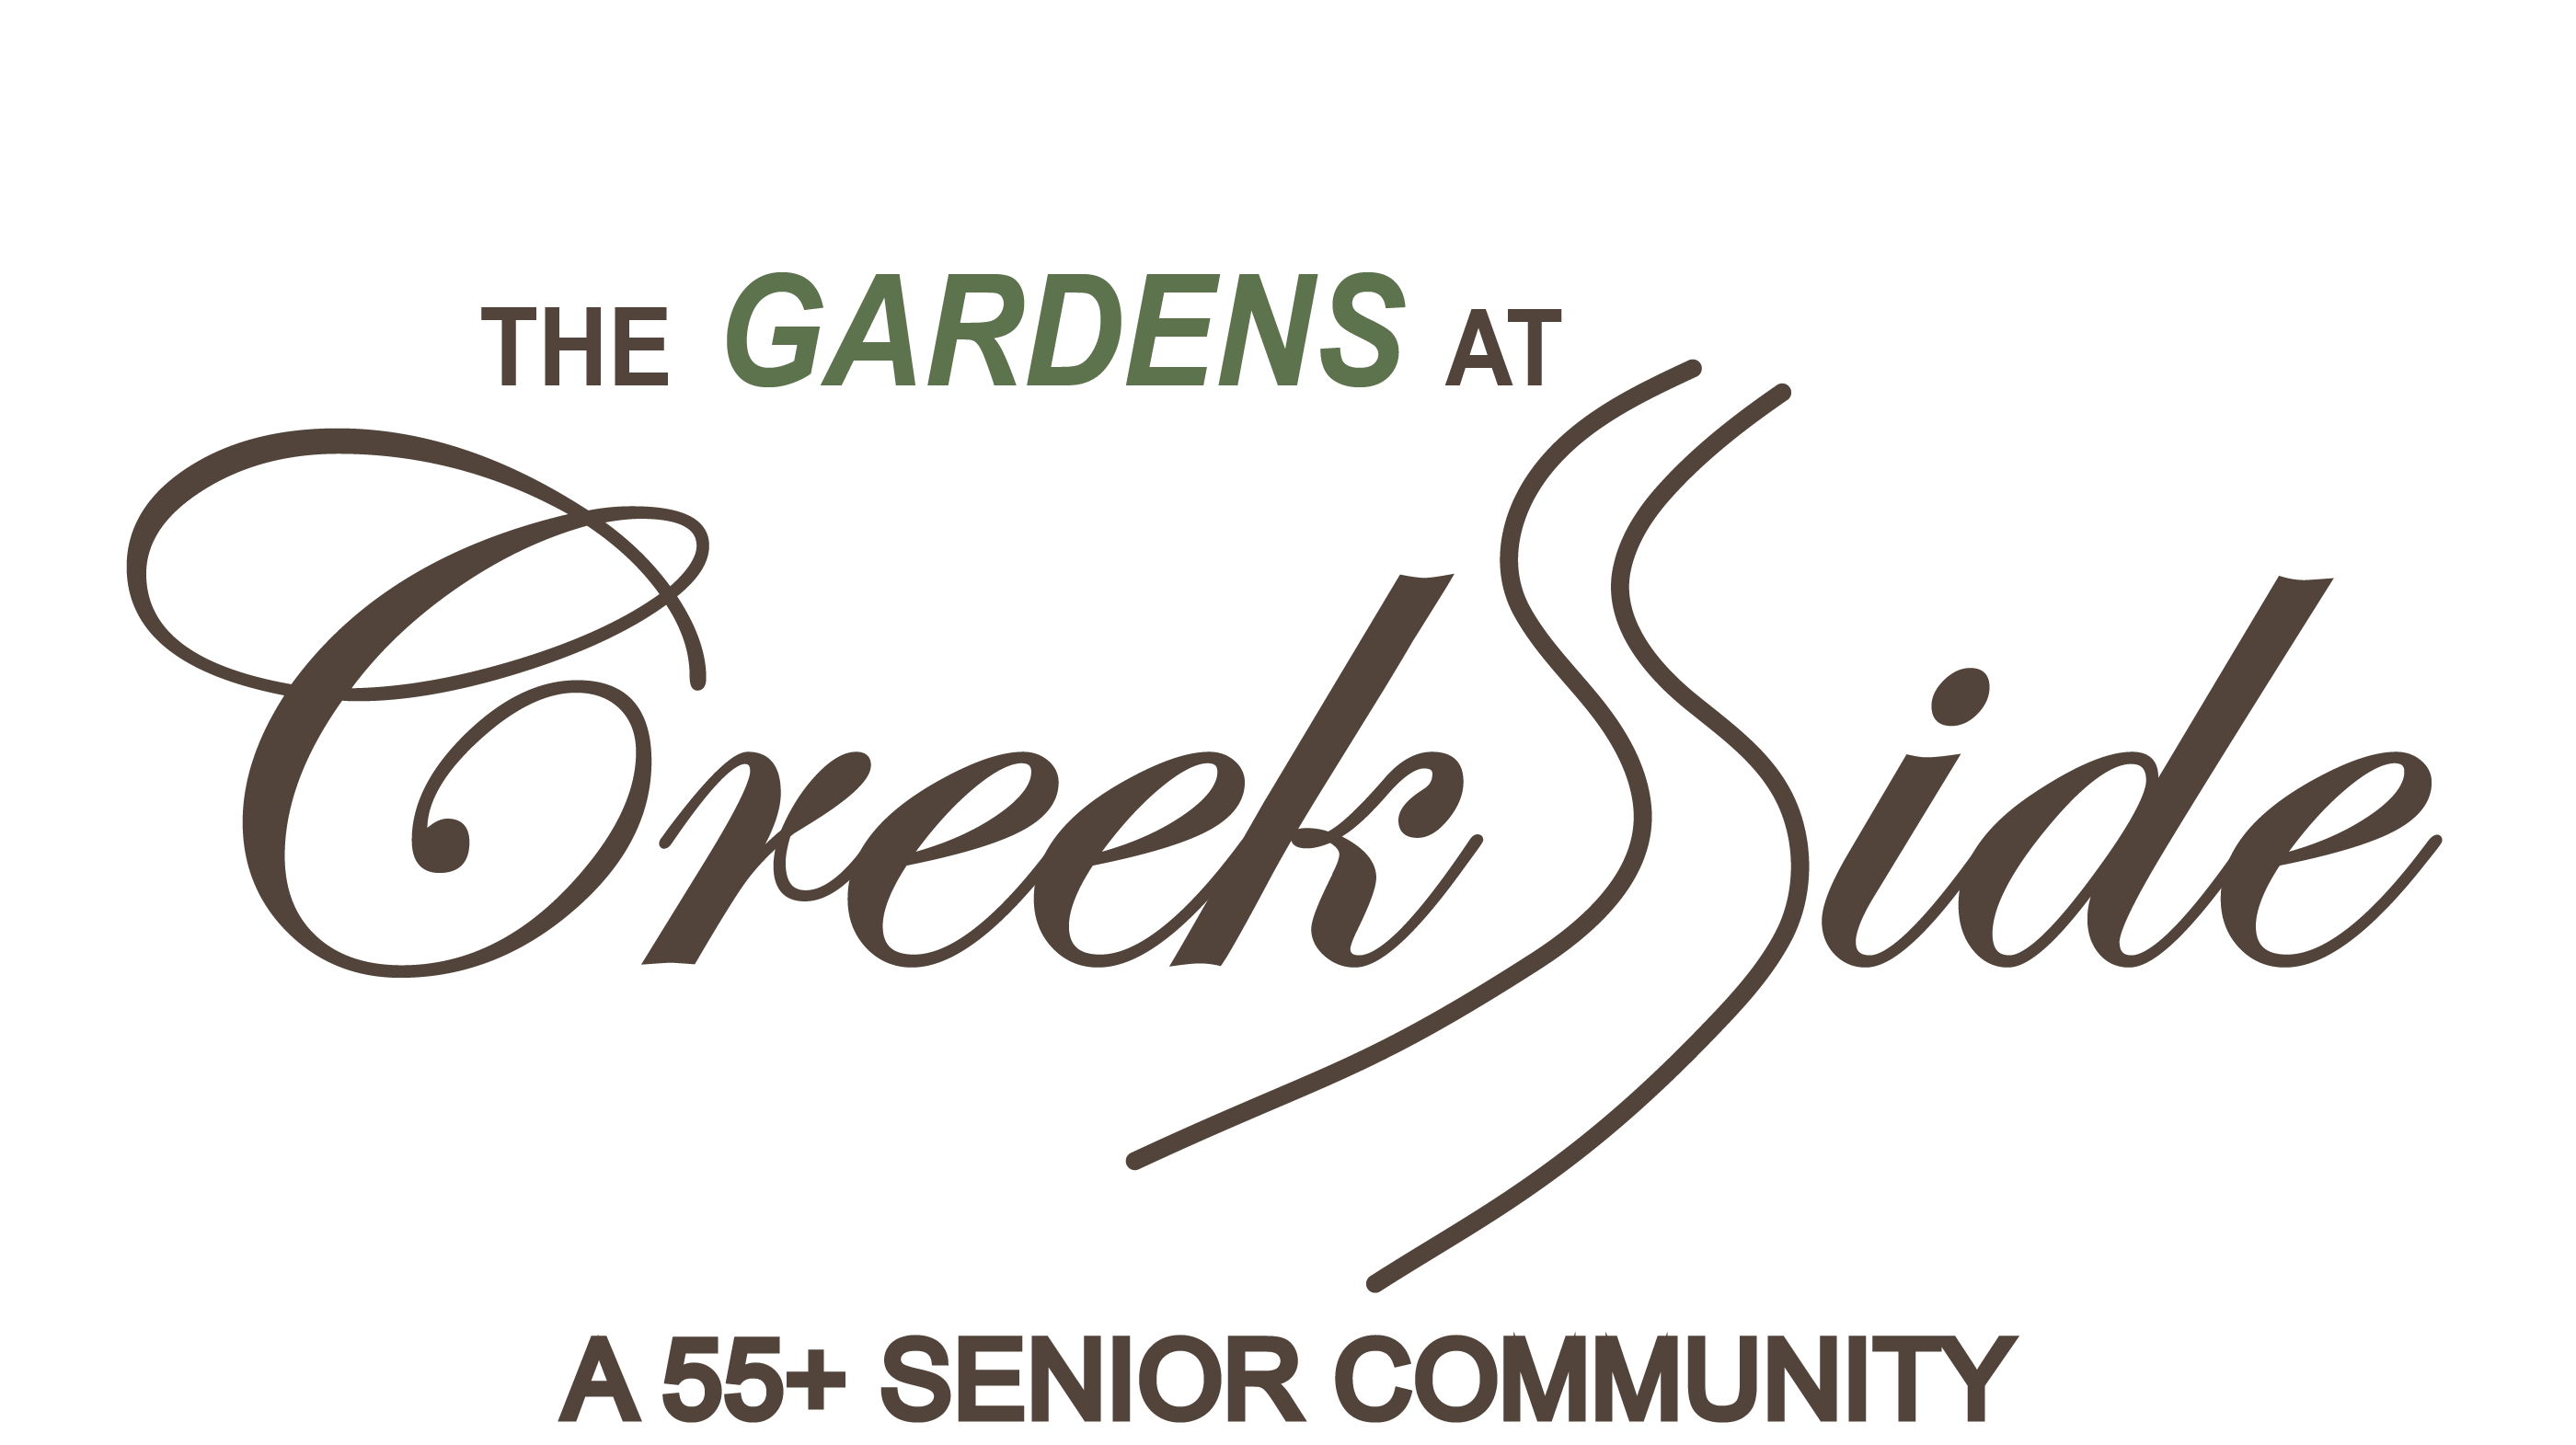 The Gardens at Creekside Logo